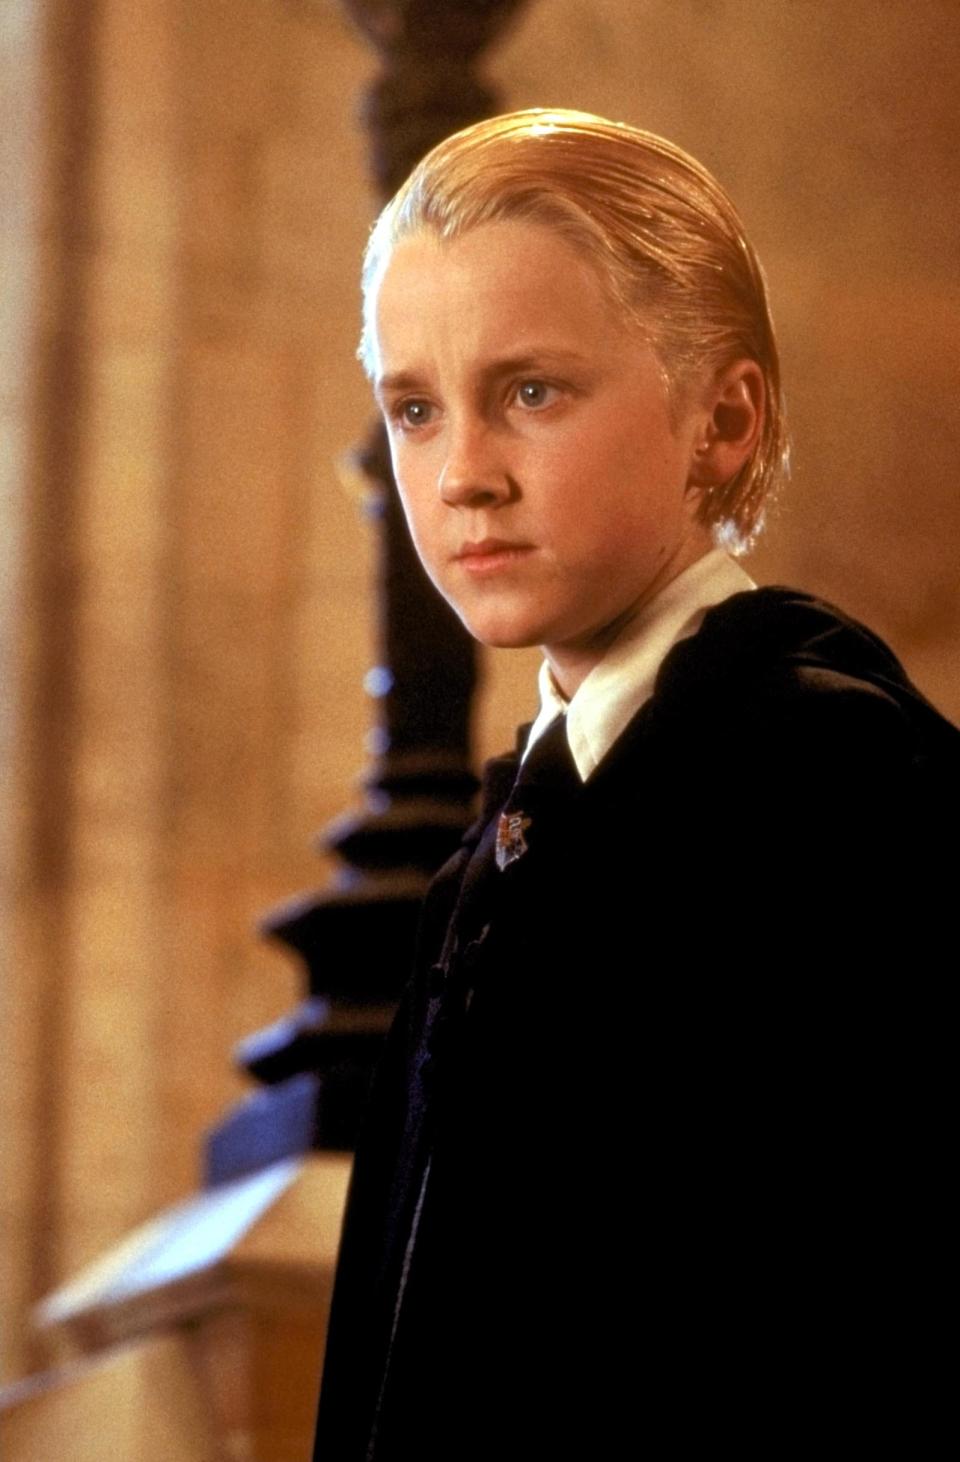 Tom Felton was 13 when he began playing Draco Malfoy in the "Harry Potter" films.